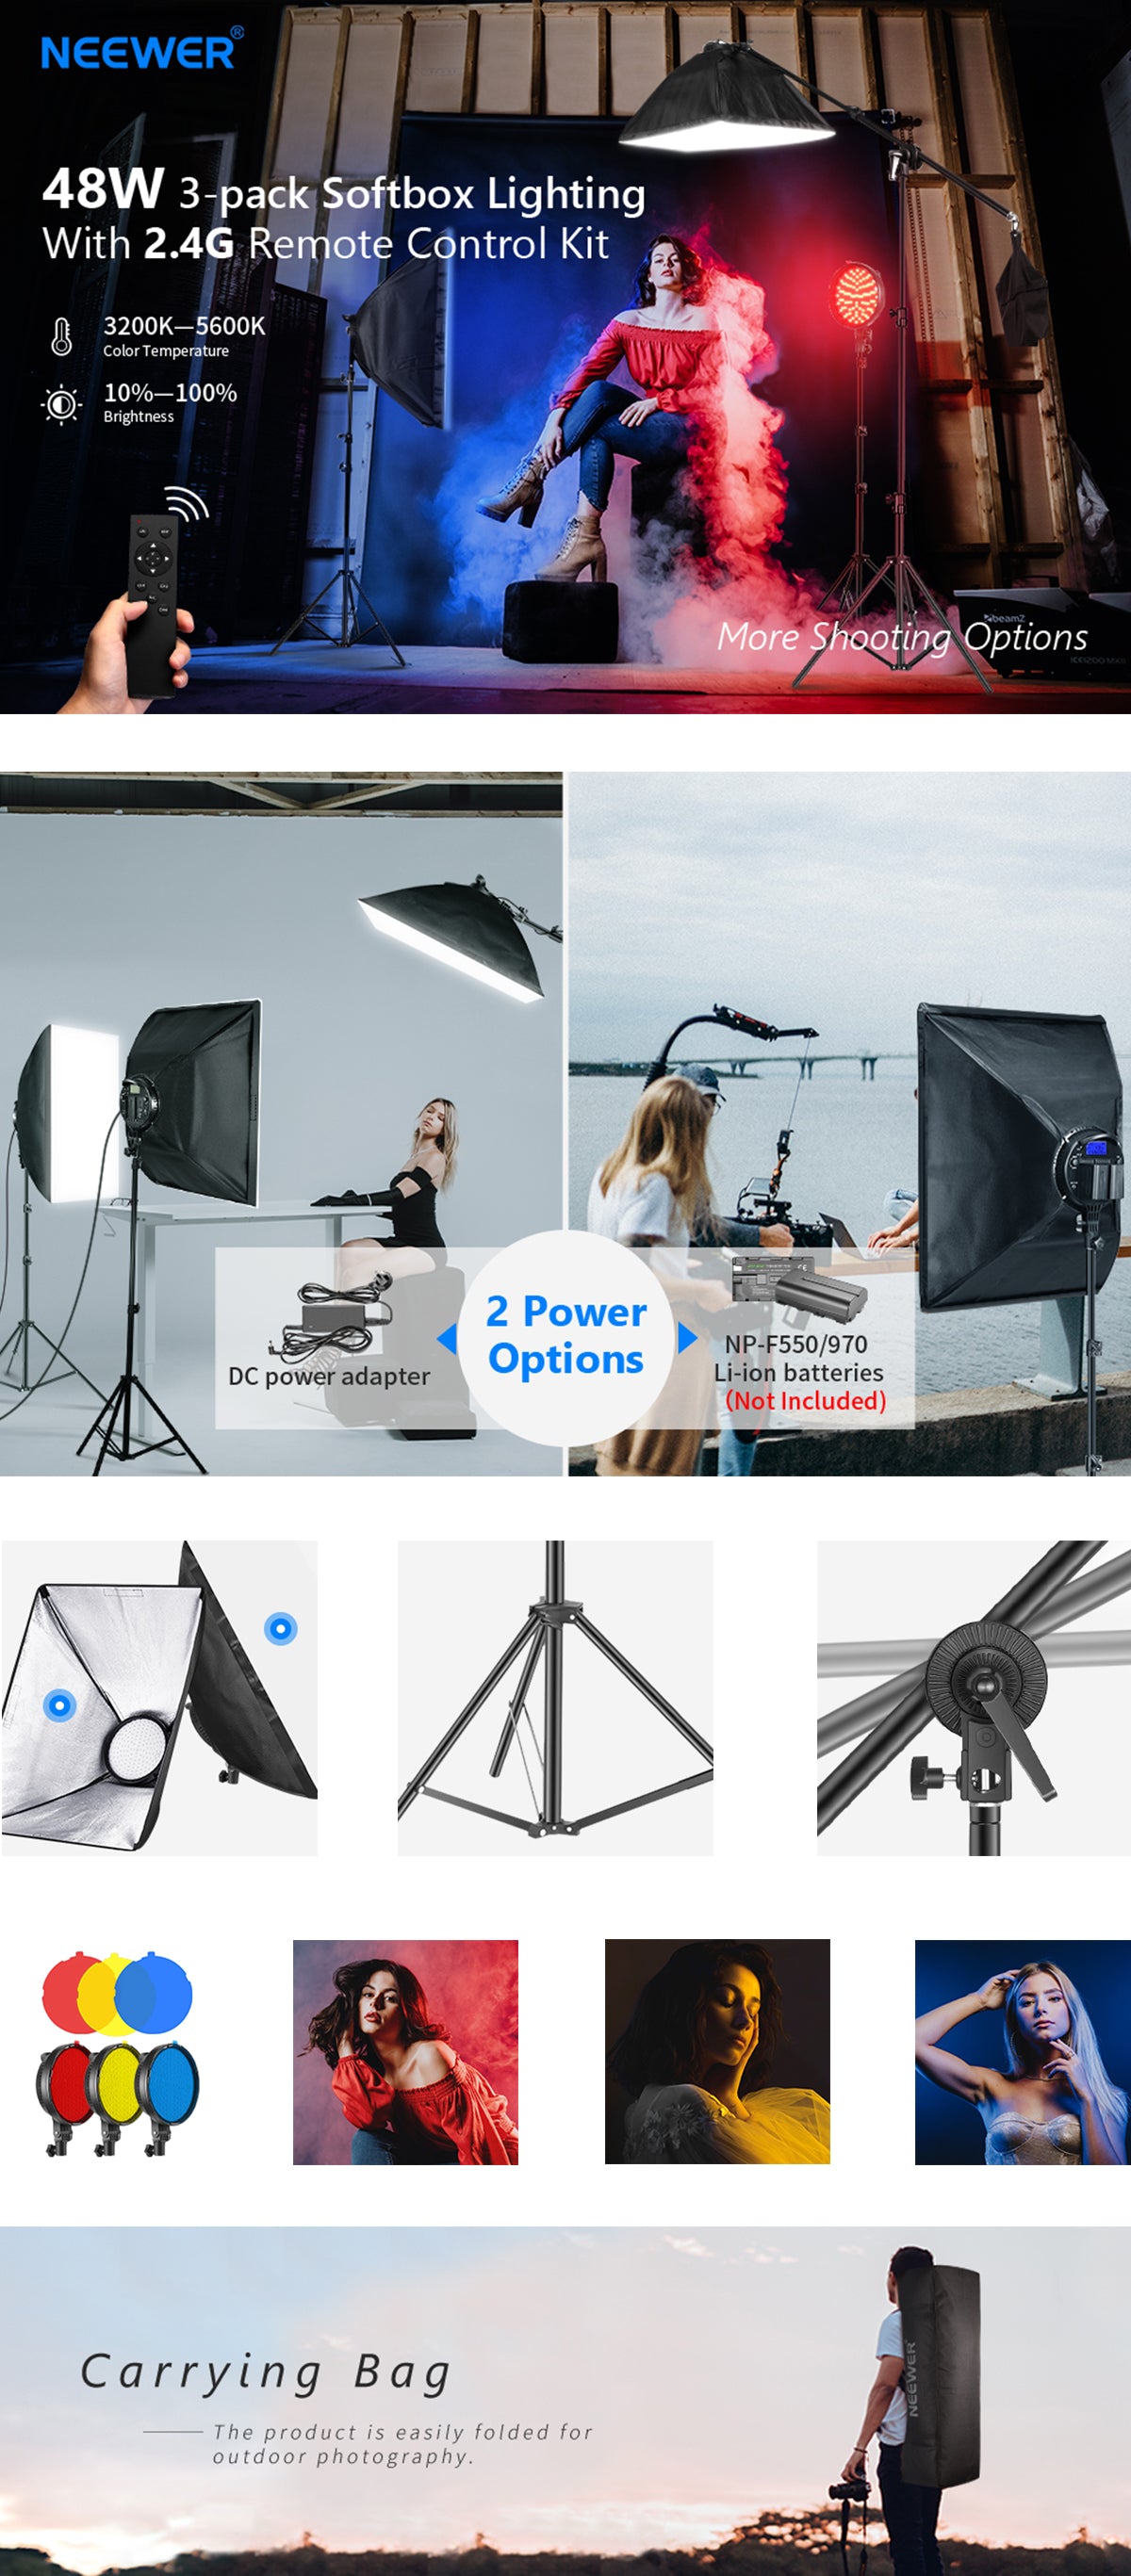 3200-5600K 48W Dimmable LED Light Head with 2.4G Remote Light Stand Neewer 3-Pack 2.4G LED Softbox Lighting Kit with Color Filter: 20x28 Softbox Bag for Photo Studio Video Shooting Boom Arm 